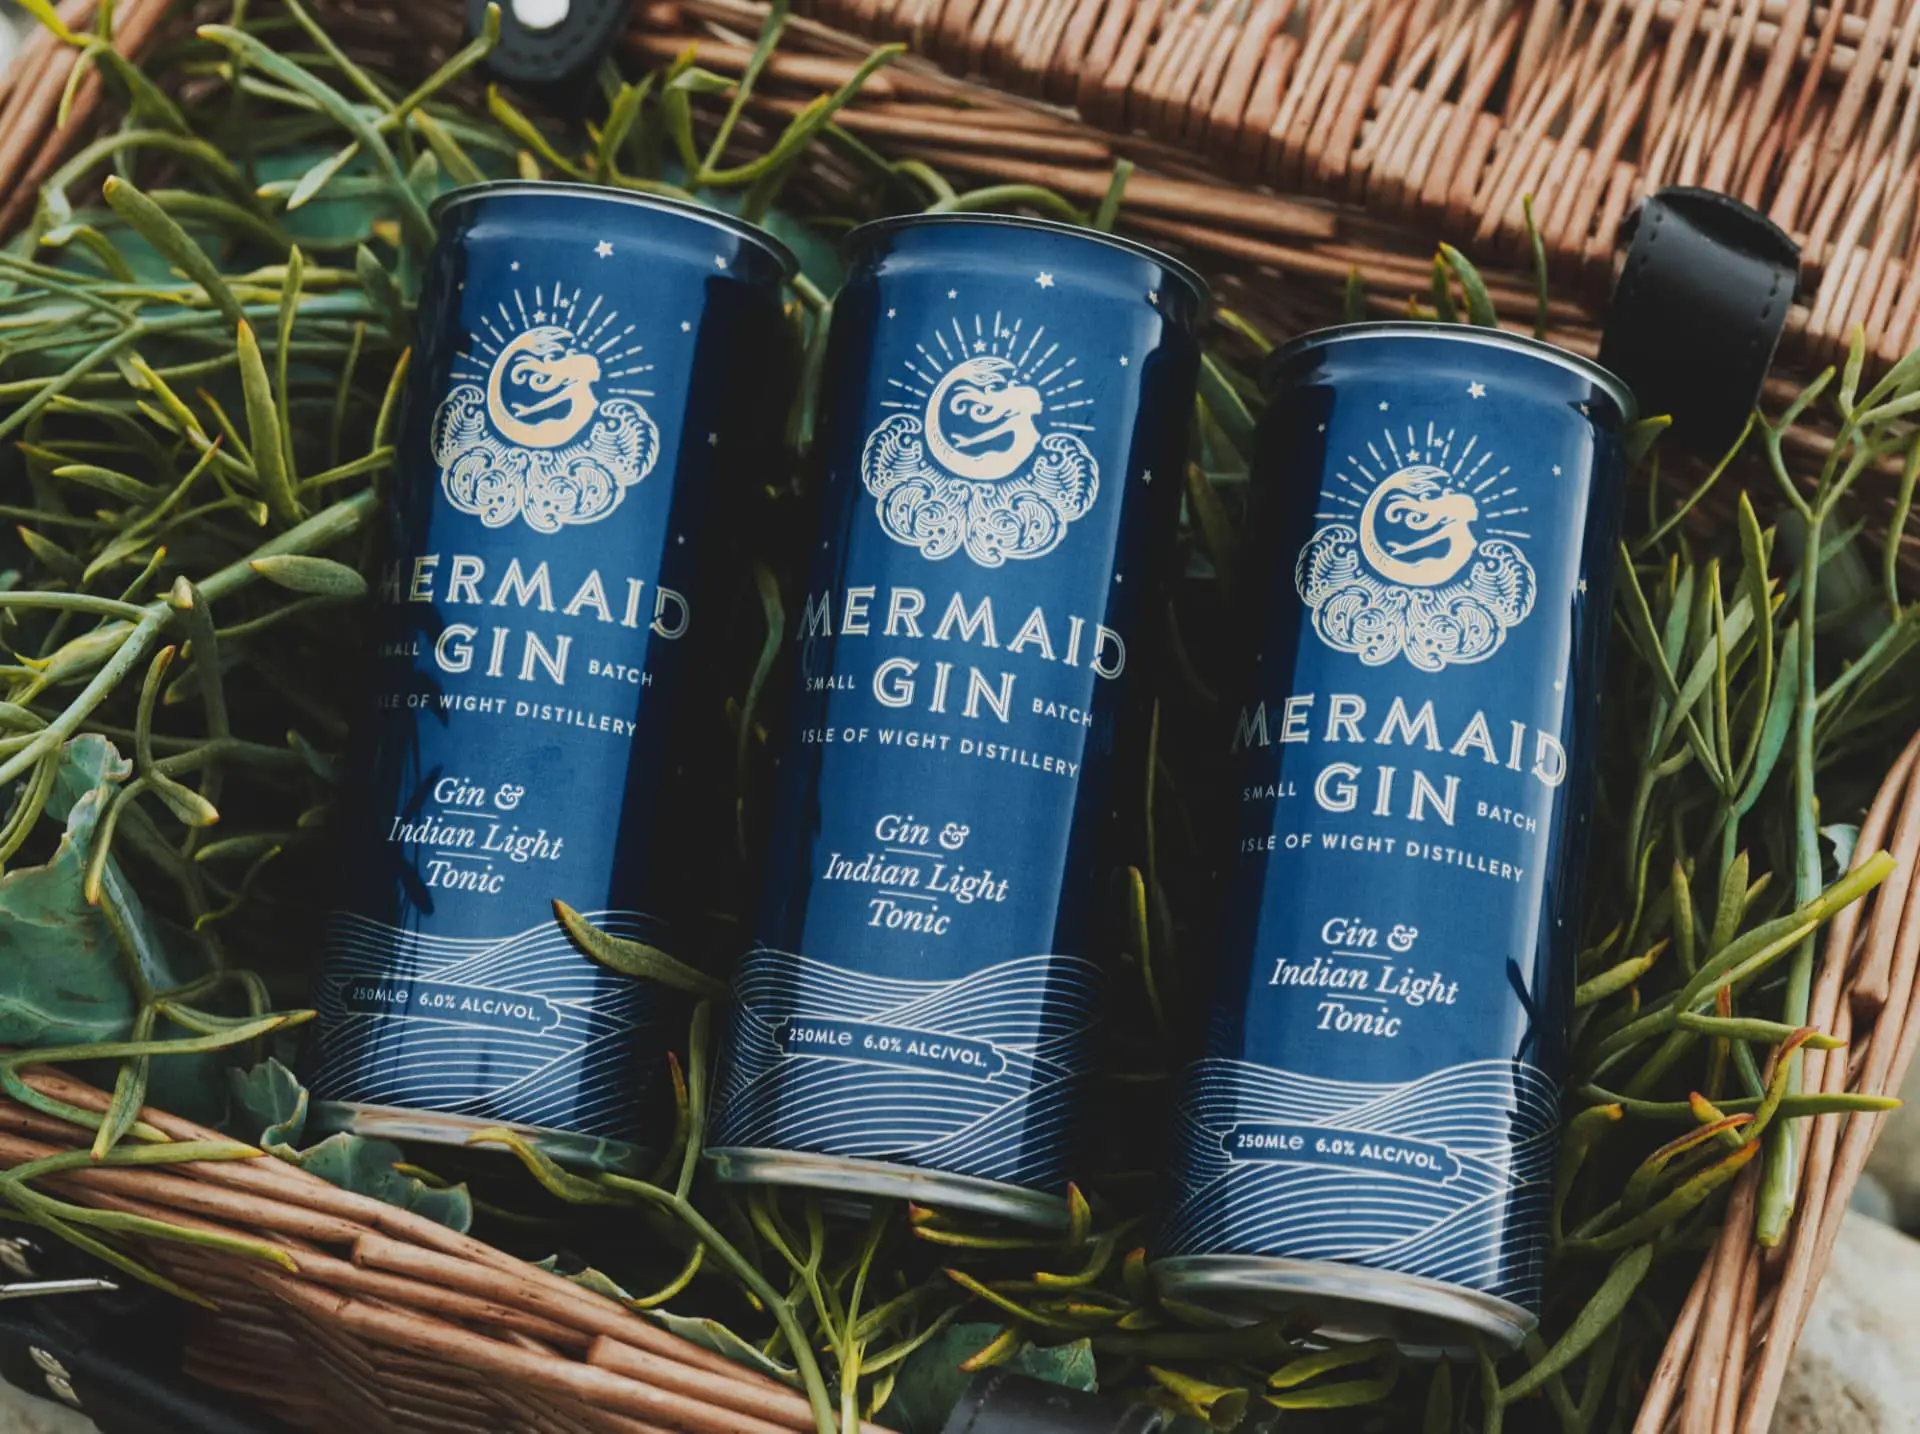 Mermaid Gin & Indian Tonic in Cans